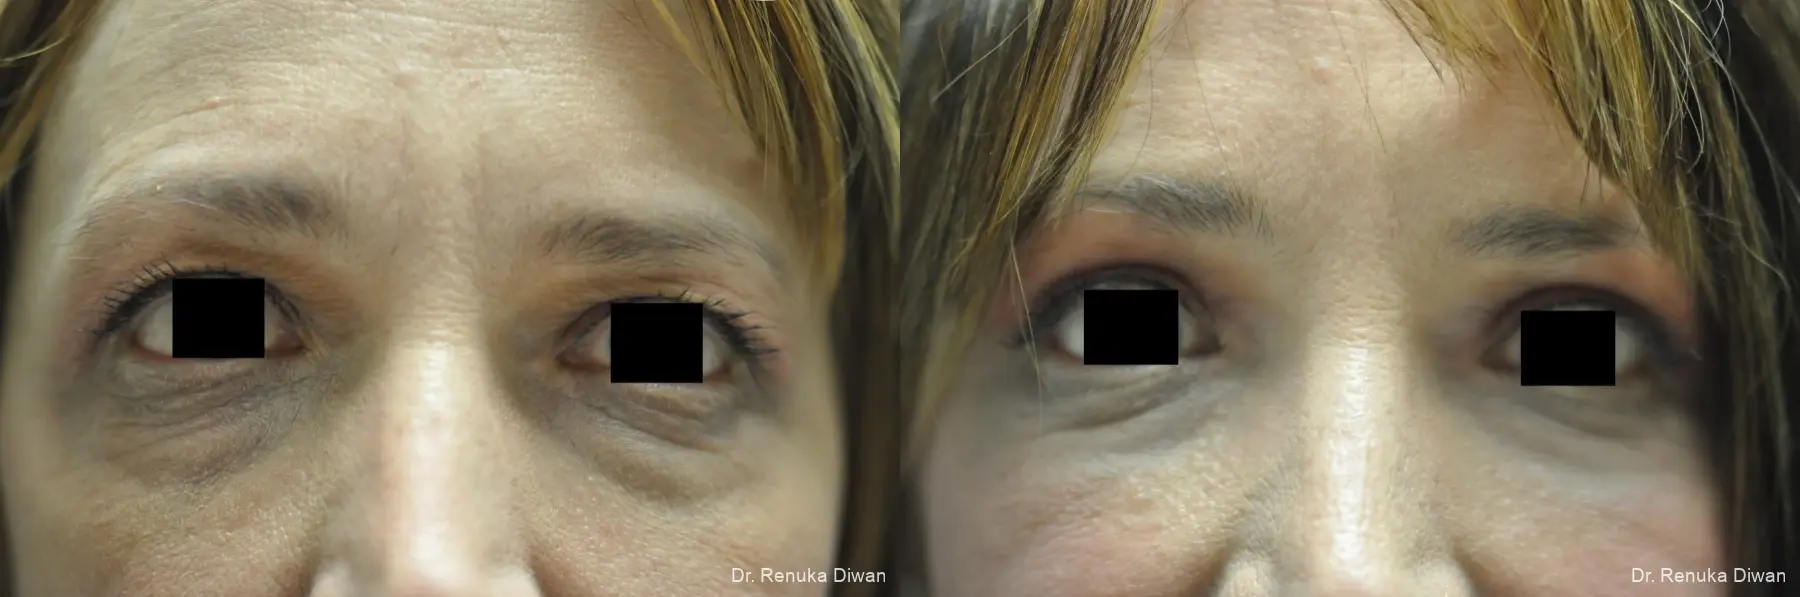 Blepharoplasty: Patient 4 - Before and After 2